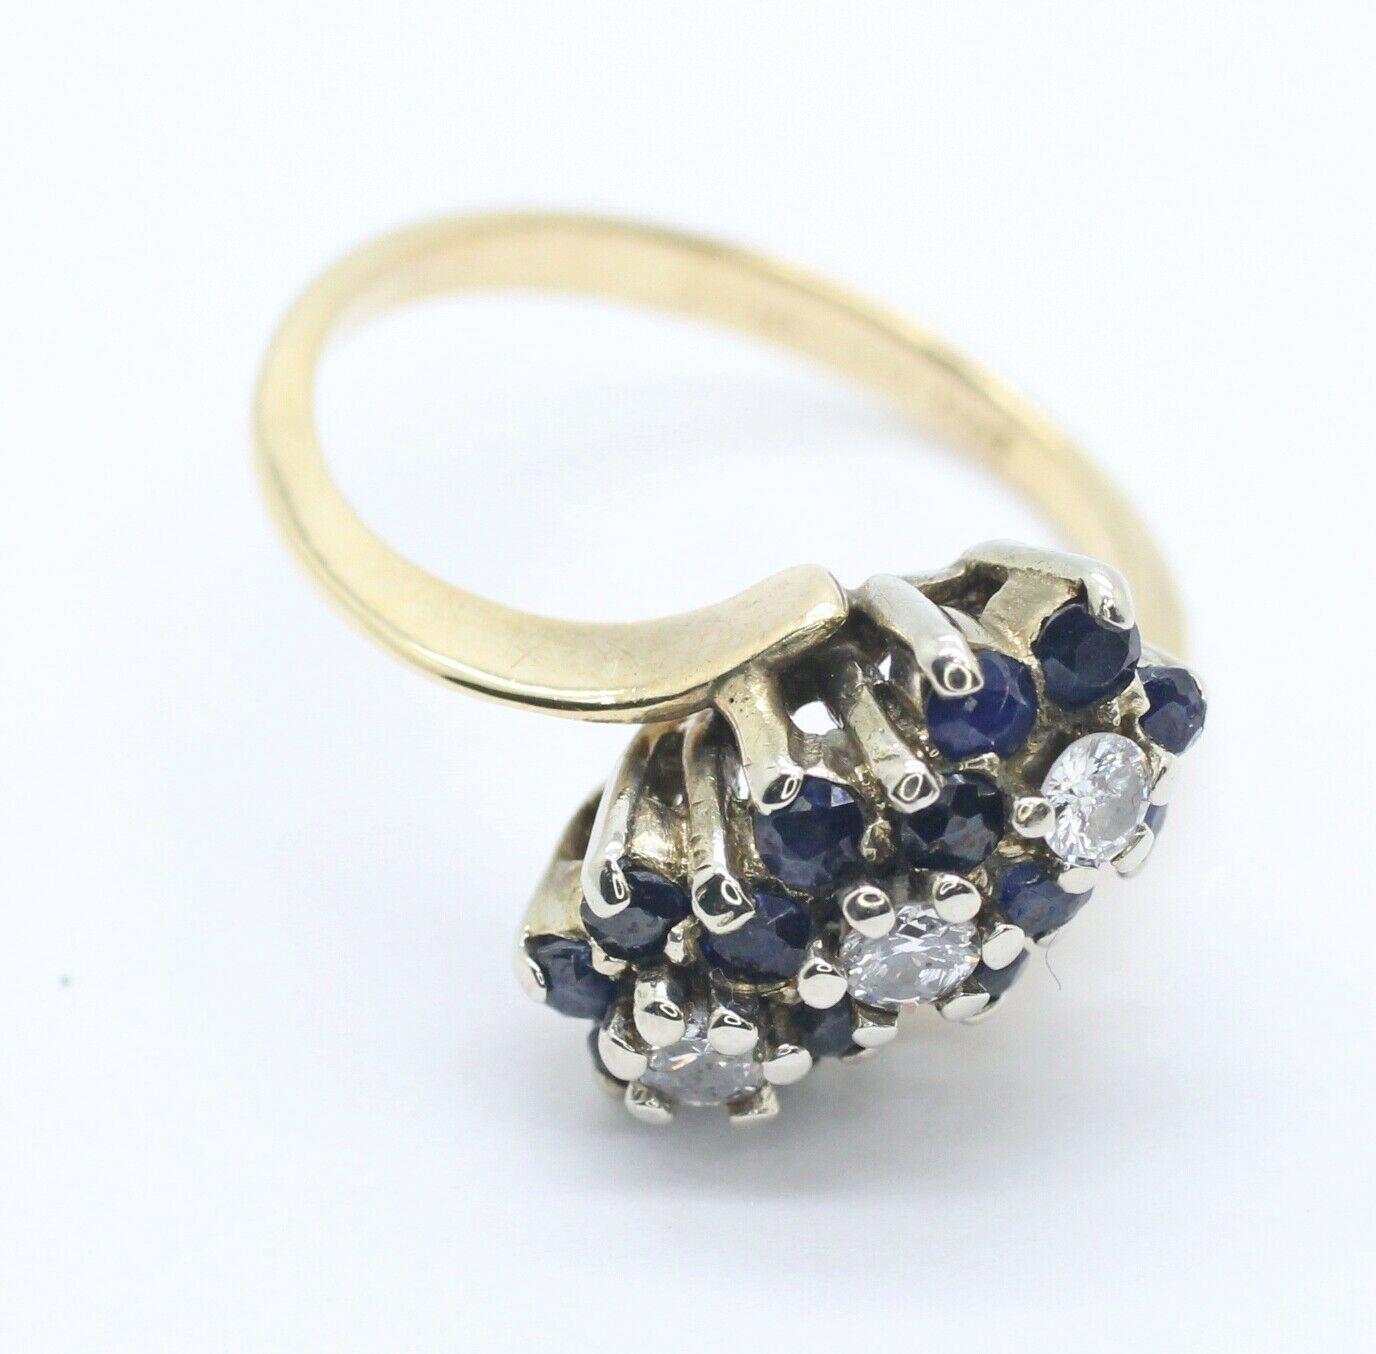  Specifications:
    main stone: 3 PCS ROUND CUT DIAMOND APPRX 0.20CTW
    GEMSTONE: 14 PCS ROUND BLUE  SAPPHIRE 1.6MM
    carat total weight: APPROXIMATELY 0.20CTW
    color: G
    clarity: VS2
    brand: UNBRANDED
    metal: 14K YELLOW GOLD
   